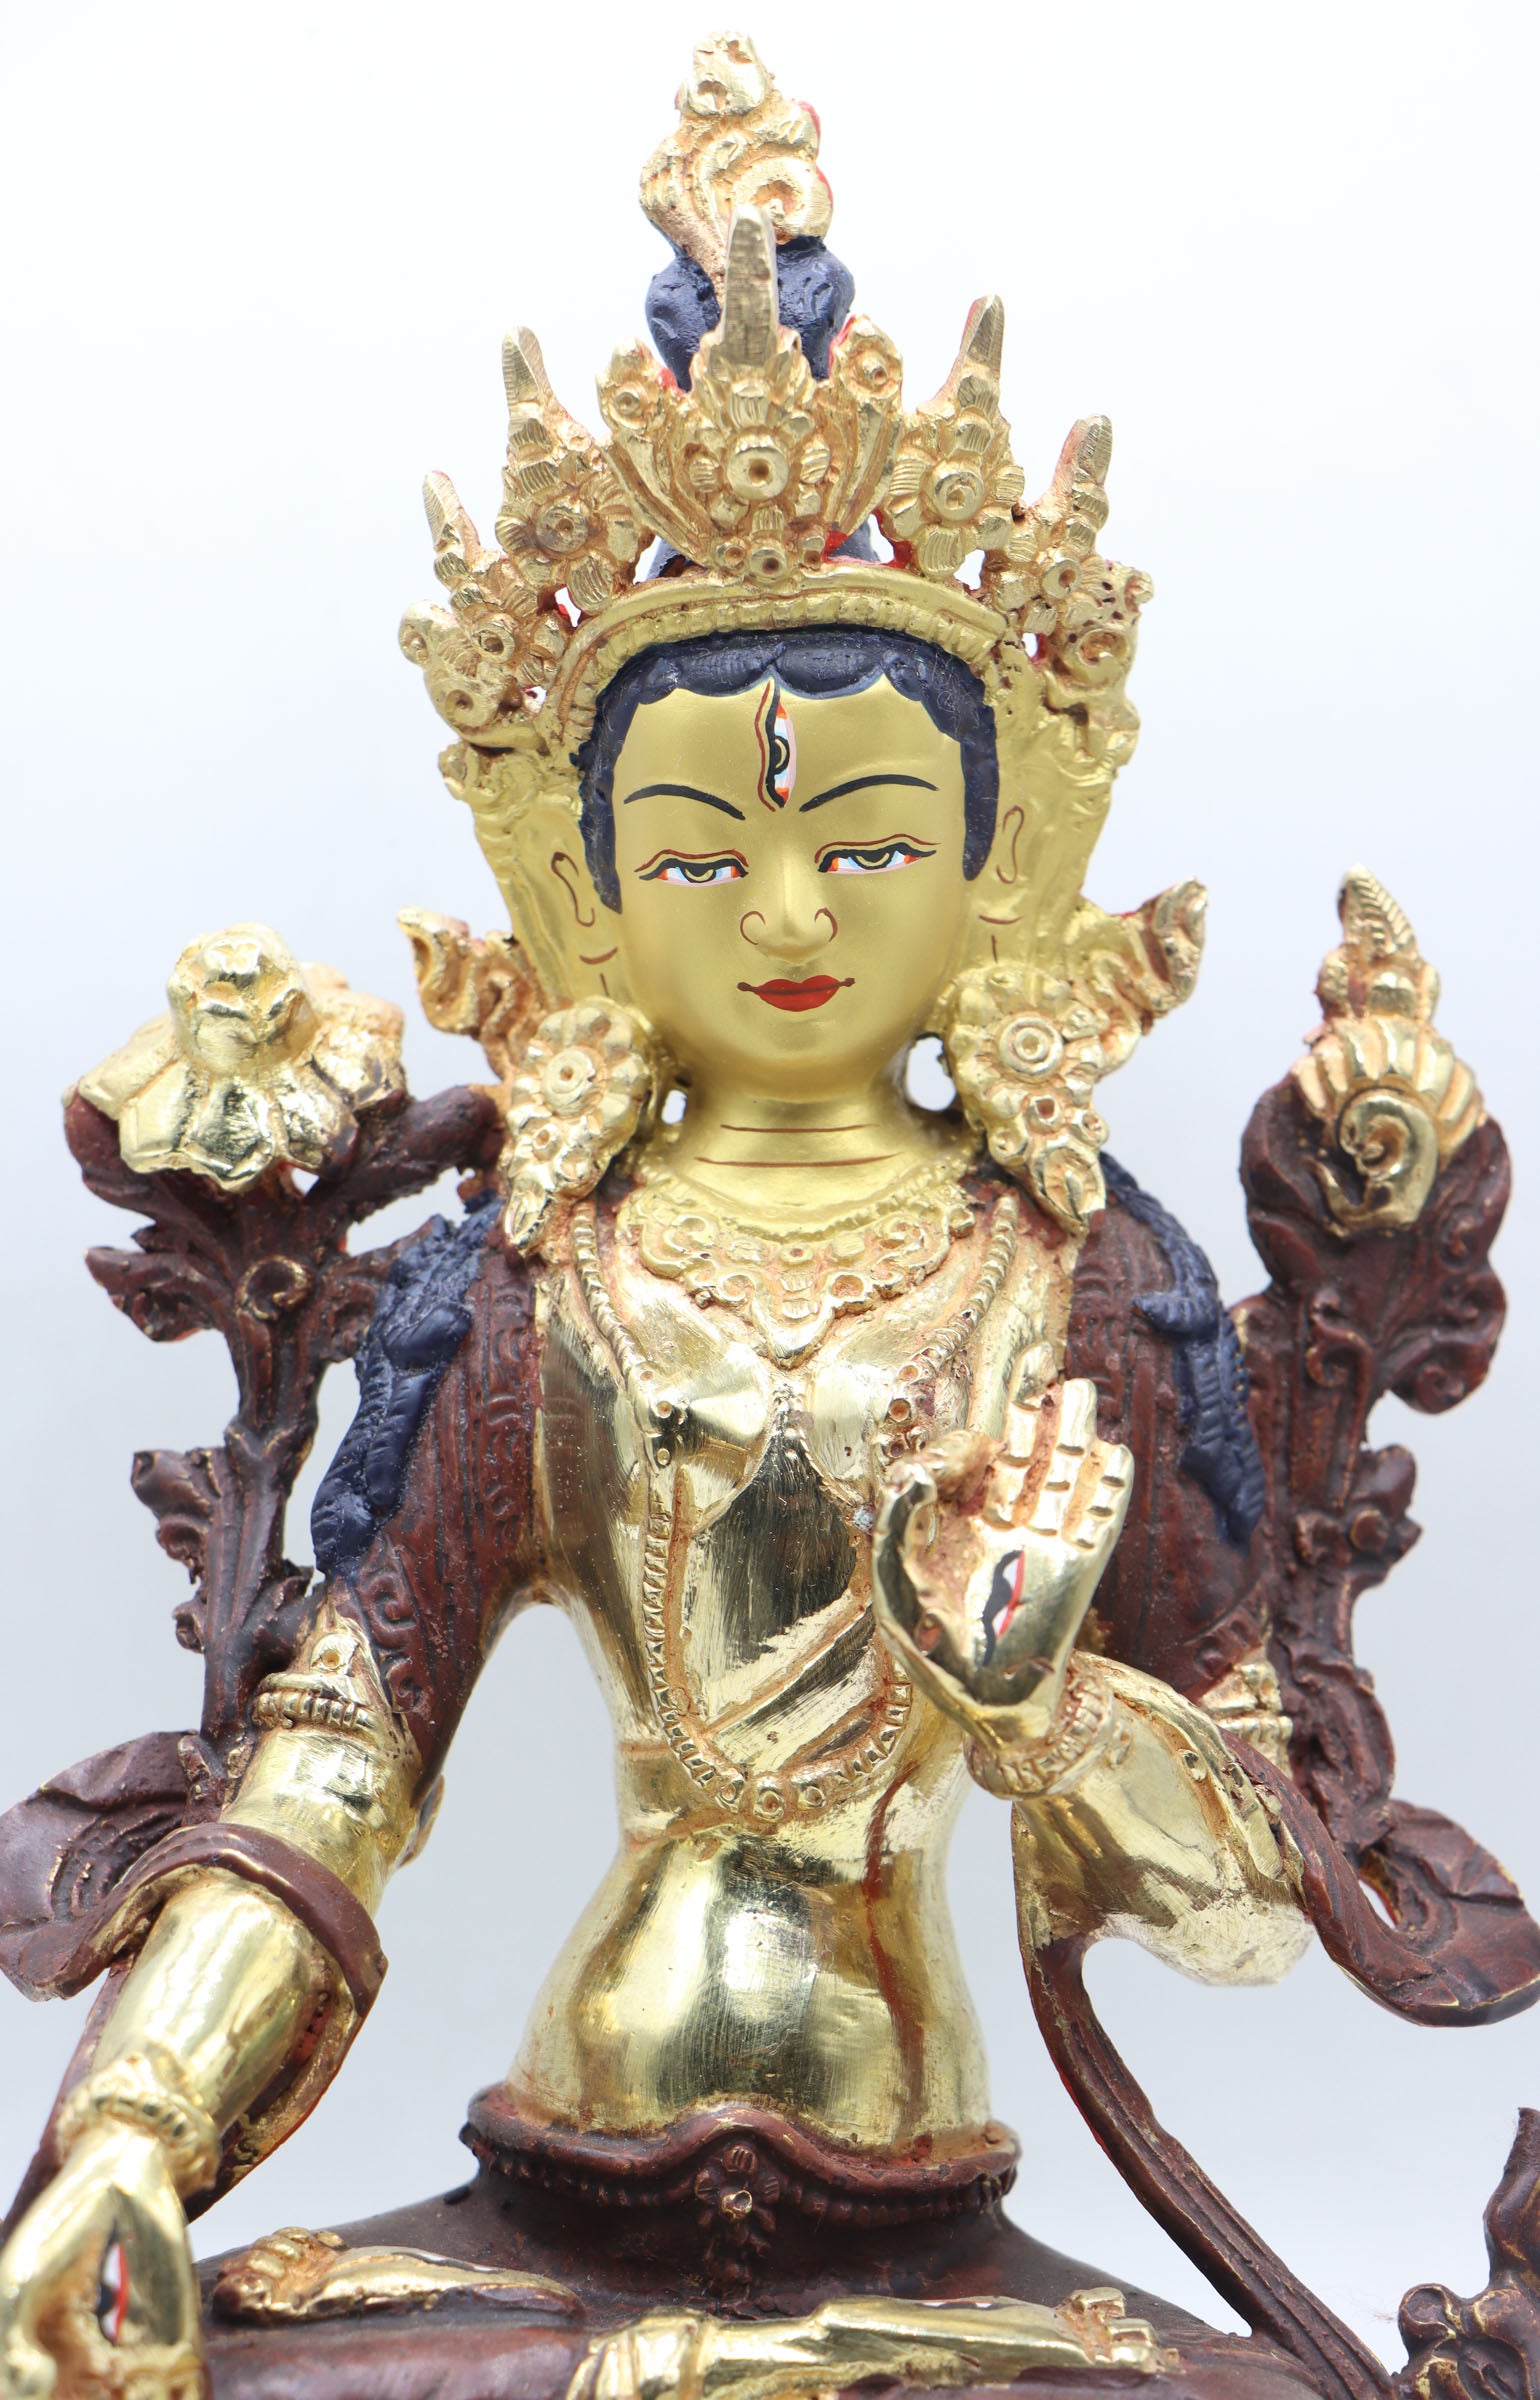 White Tara Statue for devotion and meditation in Buddhist practices.